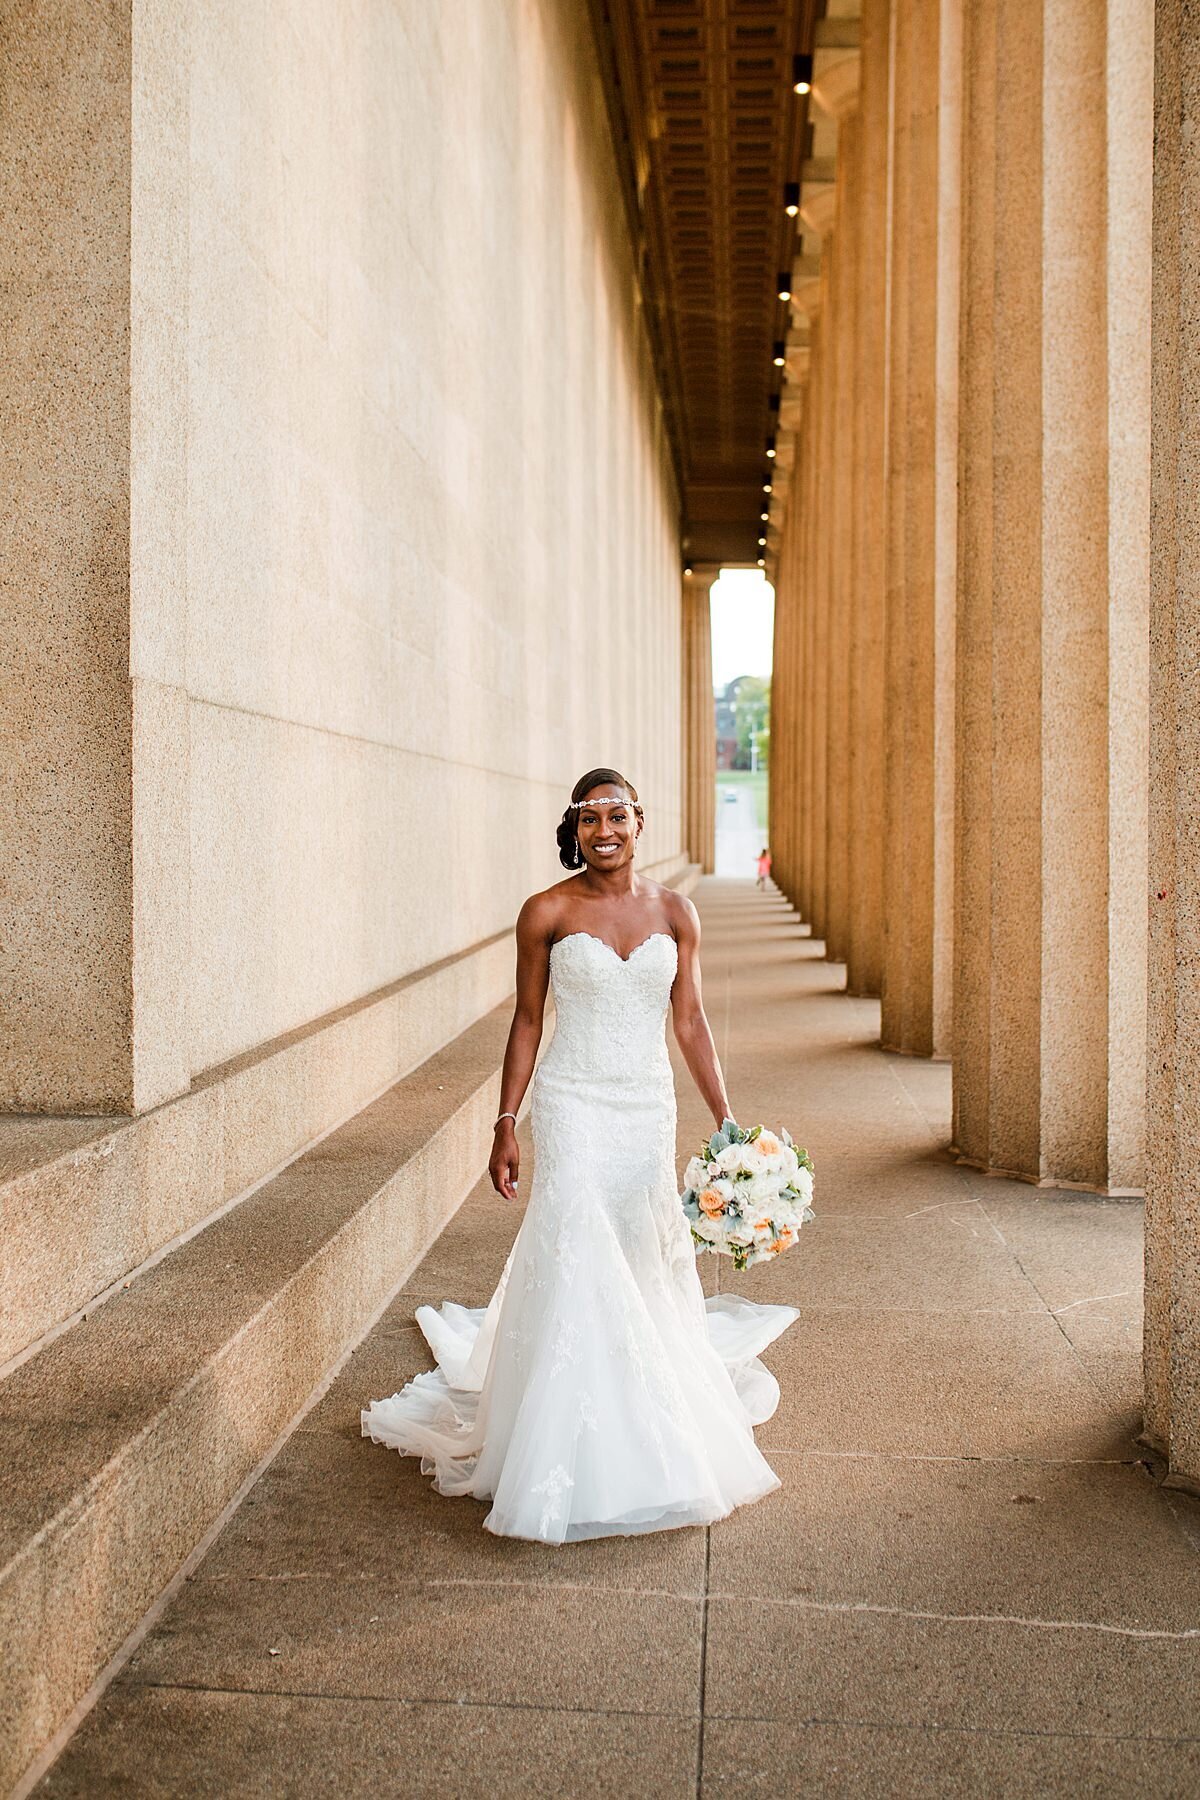 Elegant African American bride holding a peach, white and orange bouquet wearing a strapless flowing wedding gown and a rhinestone headband at The Parthenon in Nashville, TN